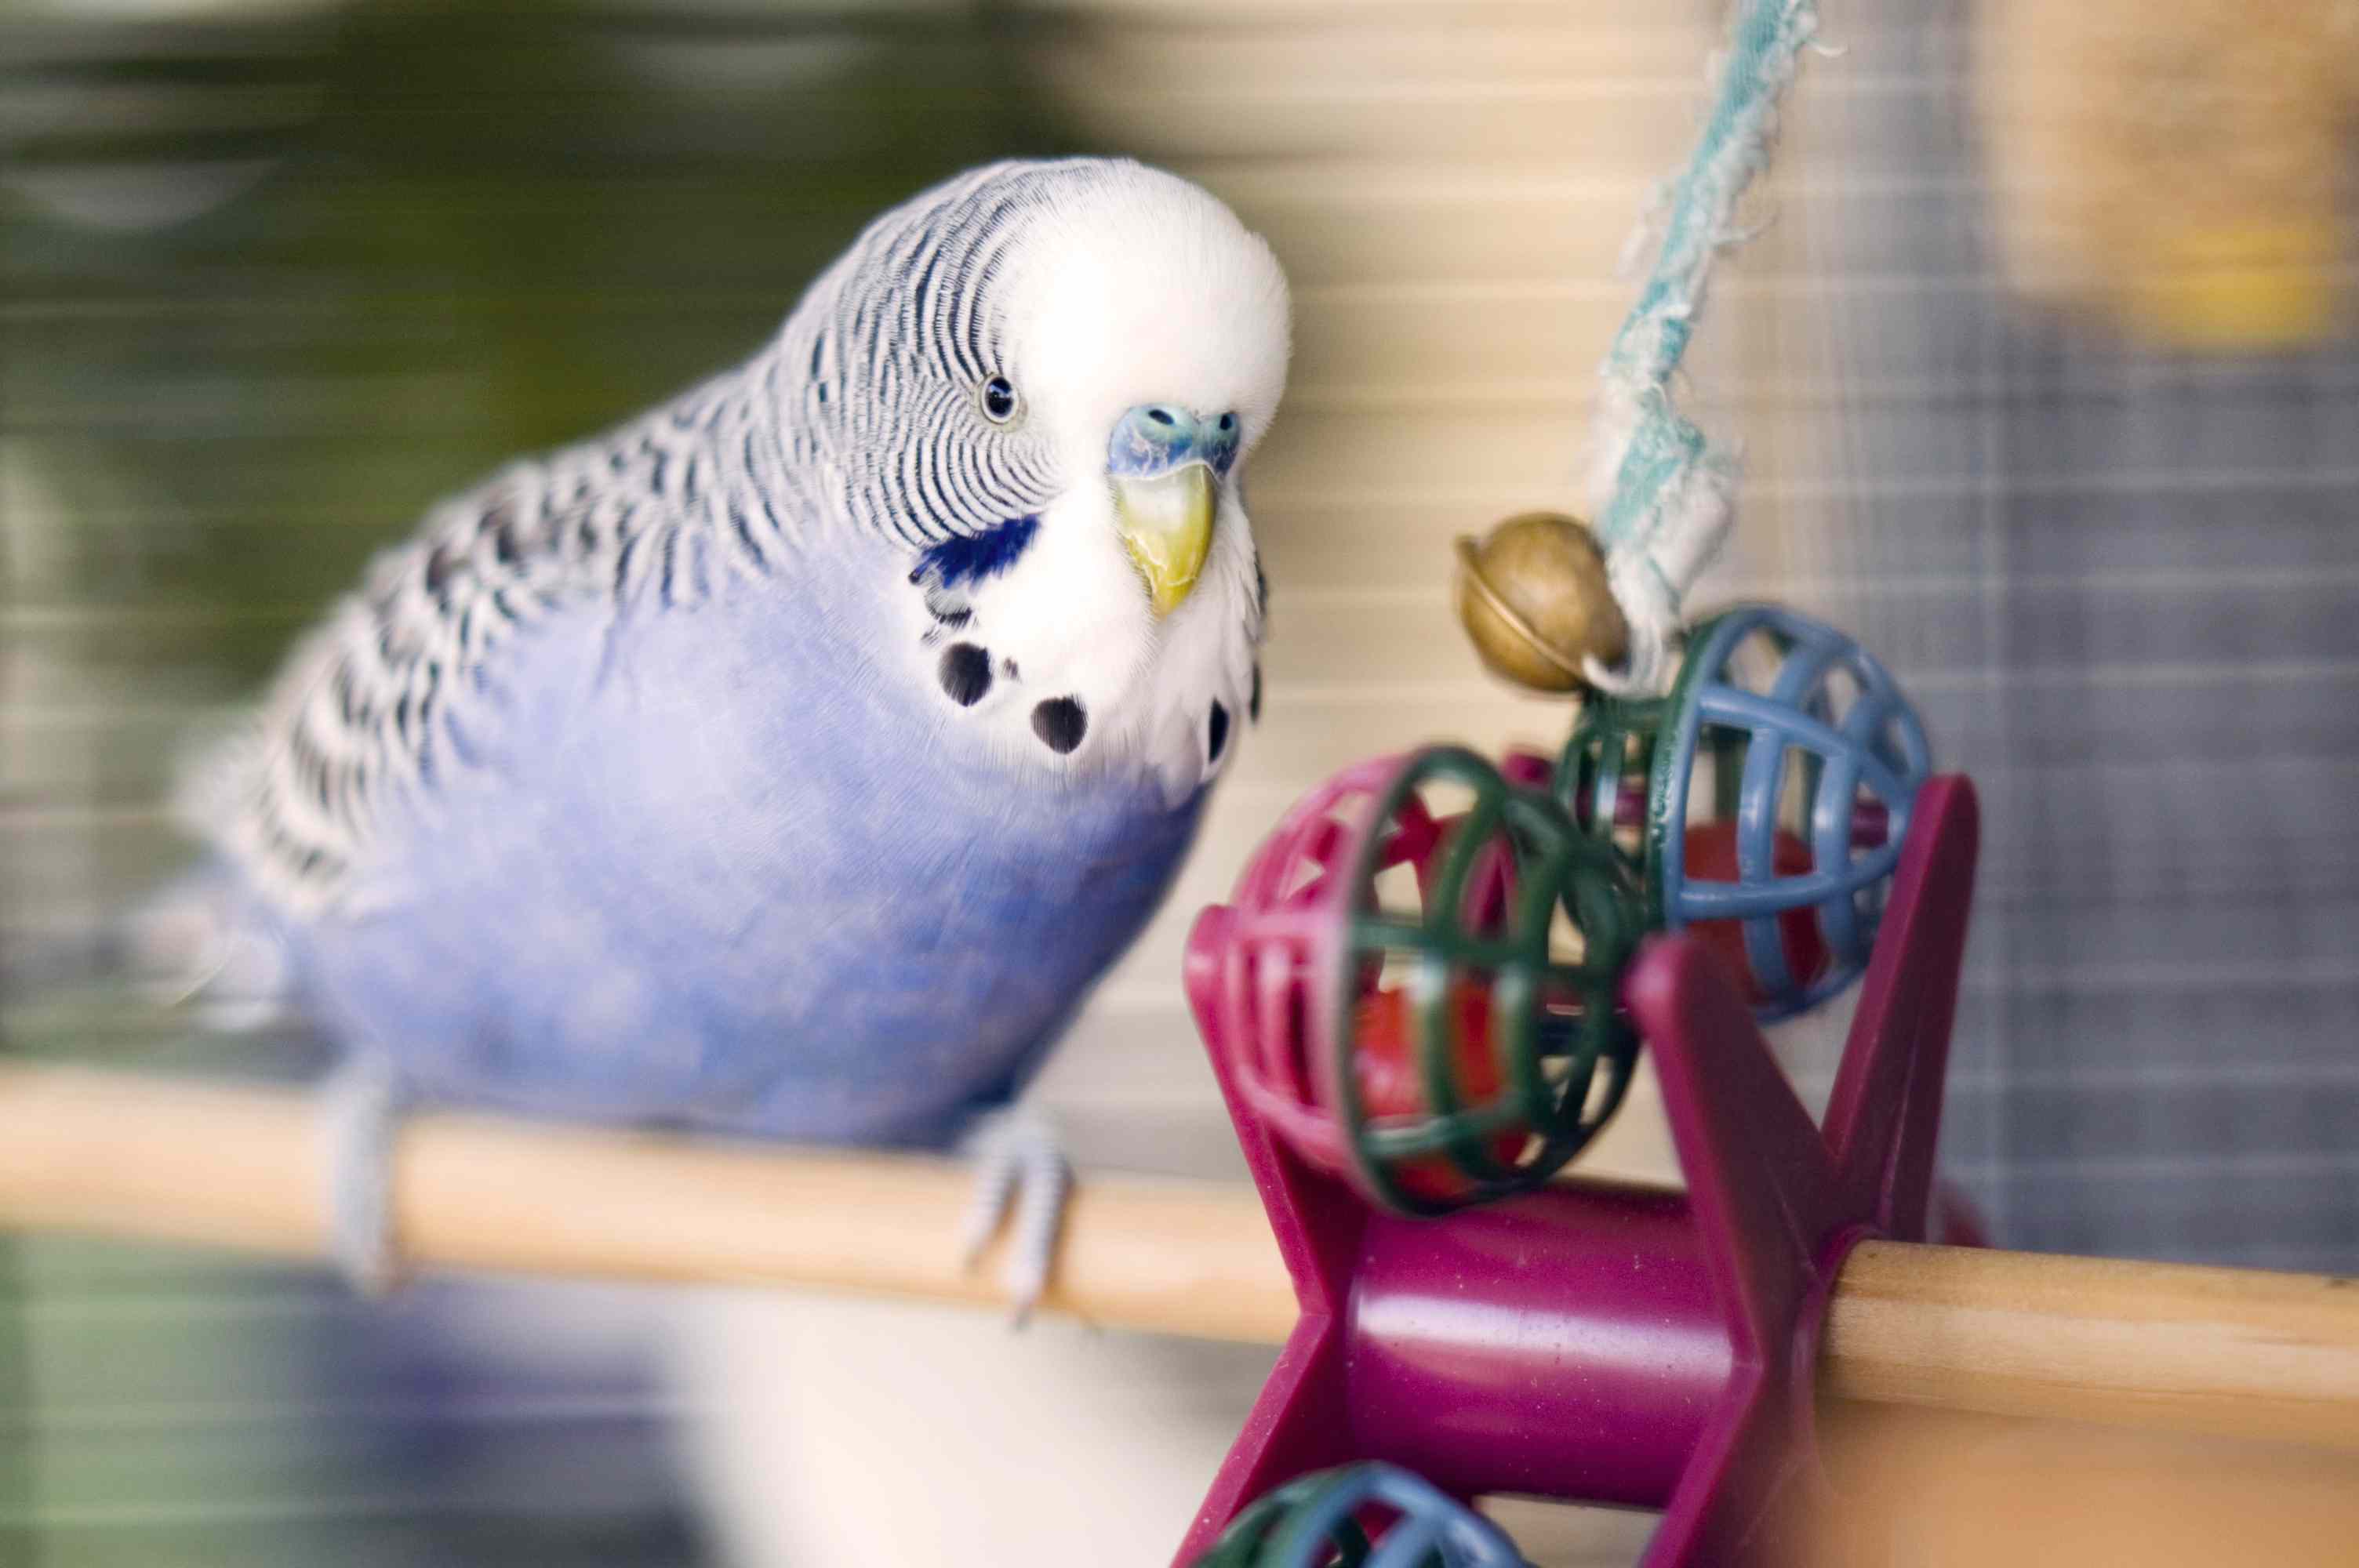 Blue budgie with a toy